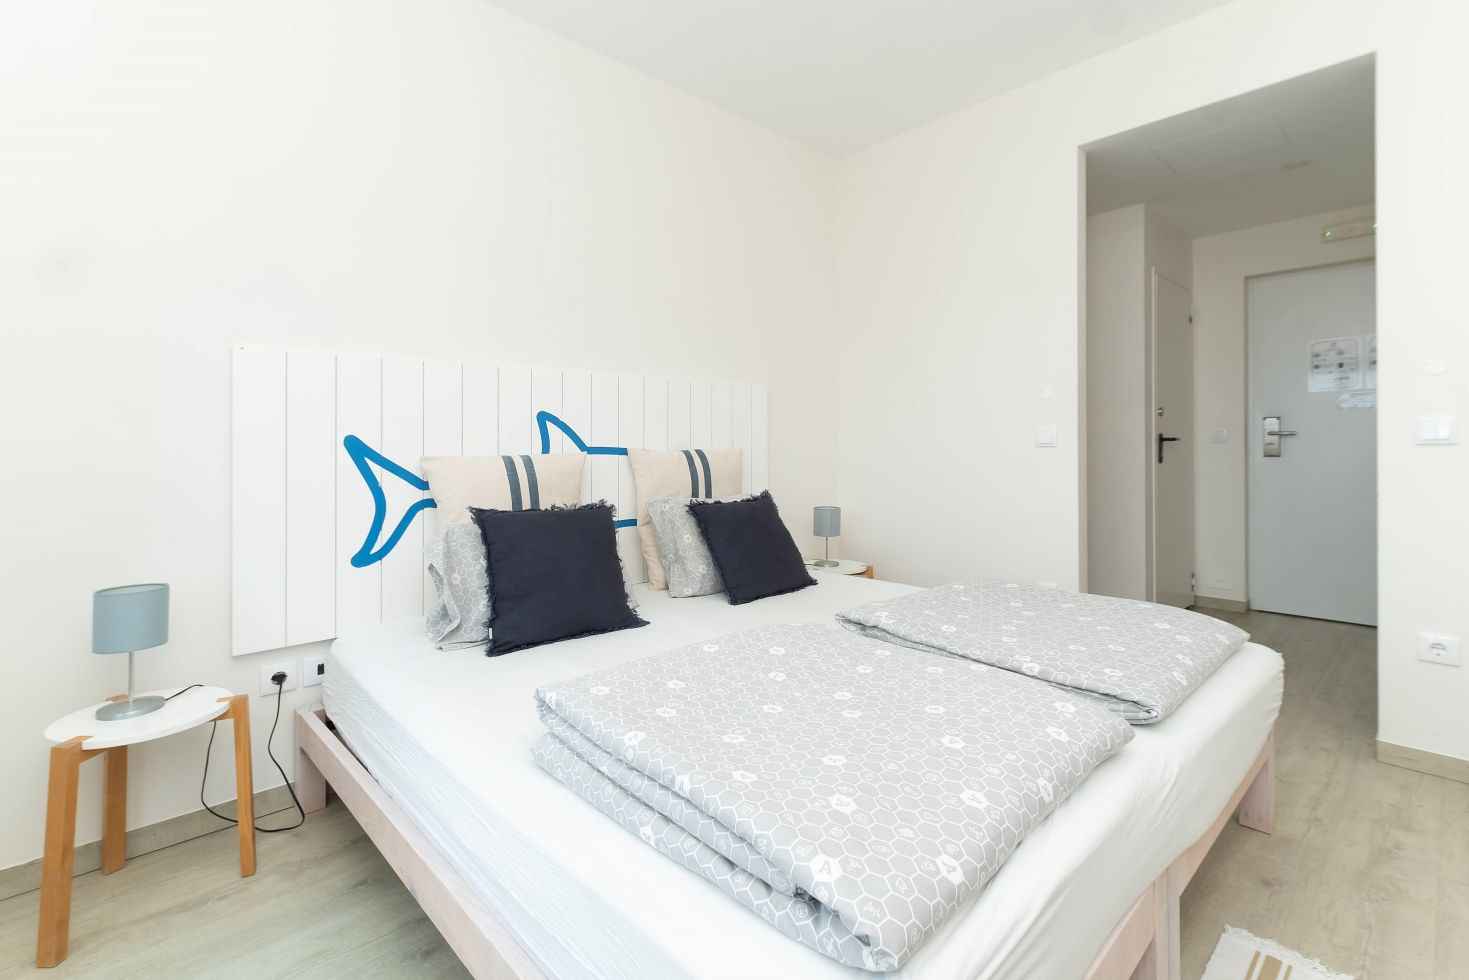 This is a cozy double room with a private bathroom and amenities and a large balcony overlooking the ocean and the pool. Extra-person: + €200